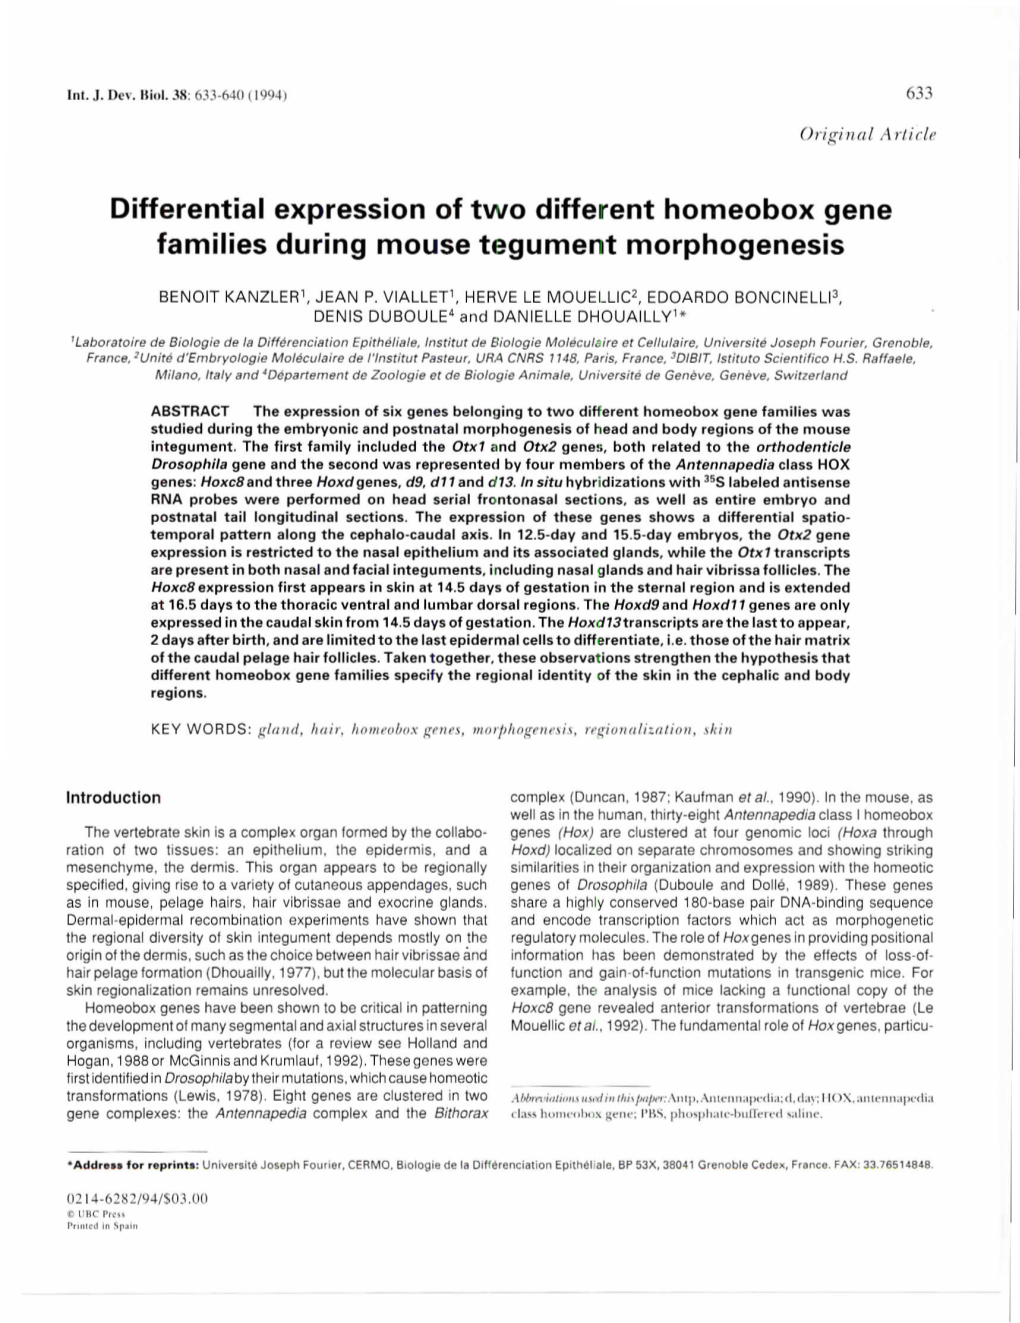 Differential Expression of Two Different Homeobox Gene Families During Mouse Tegument Morphogenesis